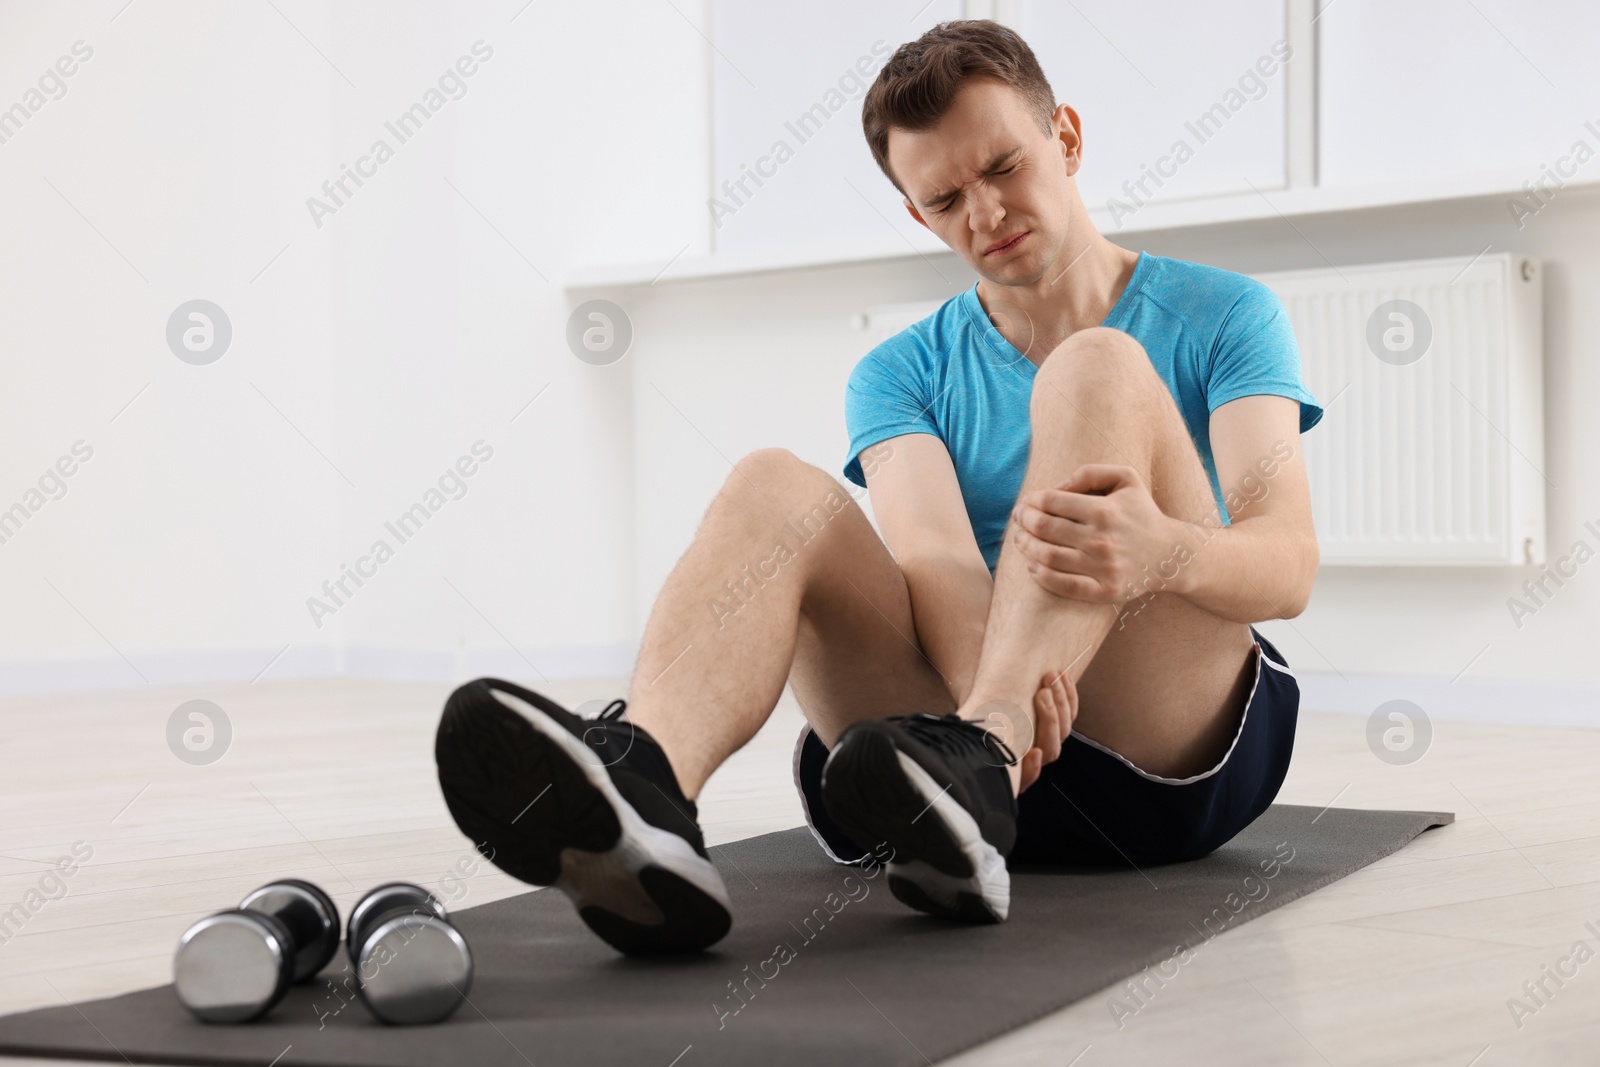 Photo of Man suffering from leg pain on mat indoors